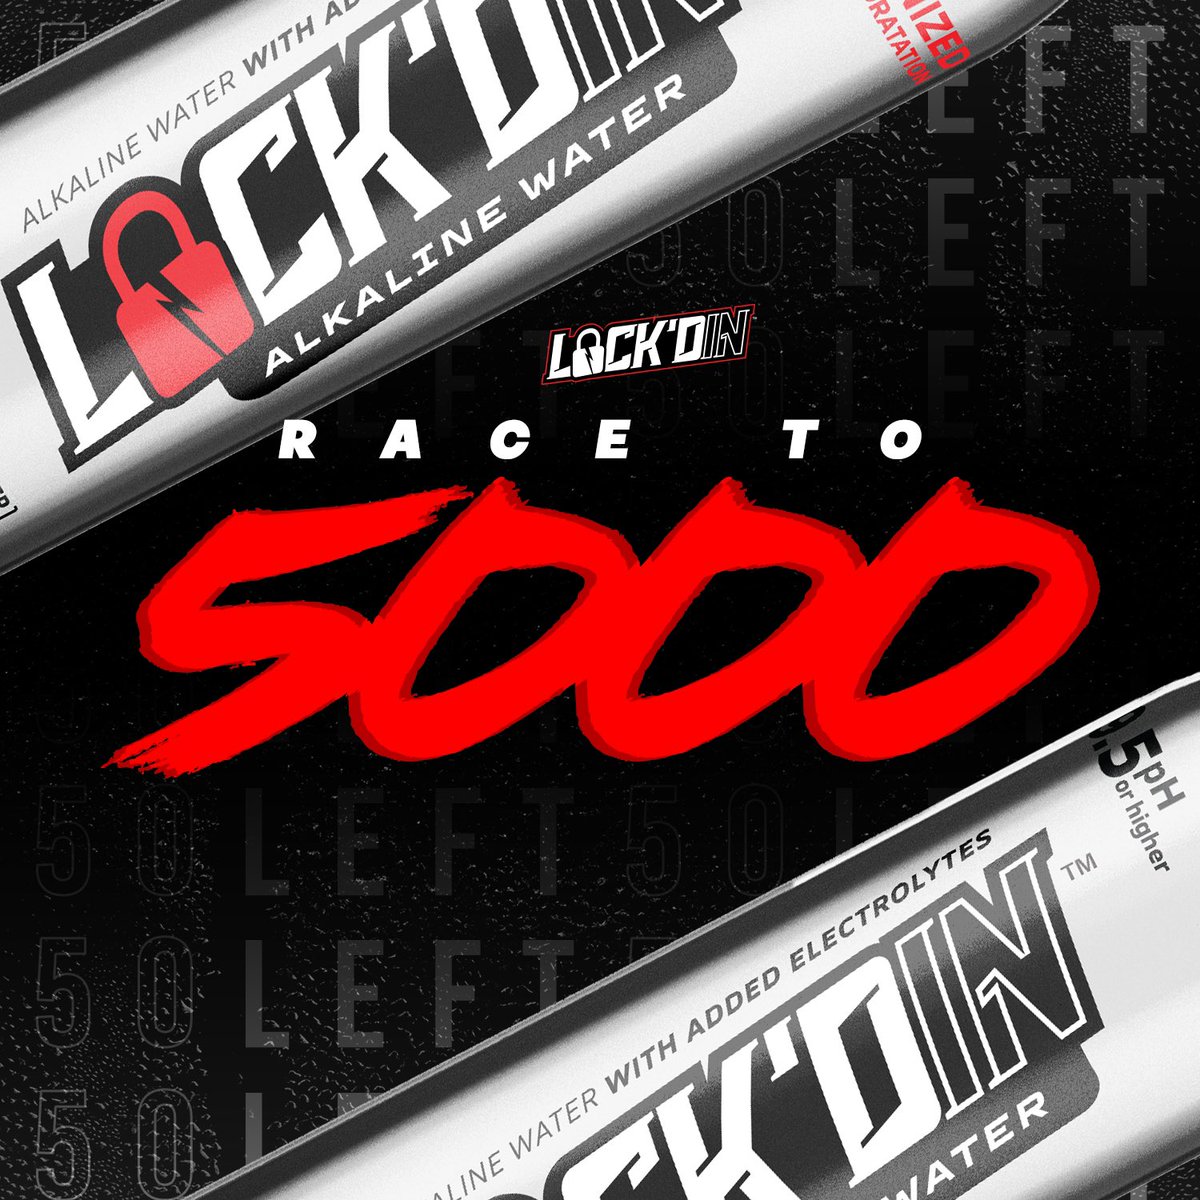 Count down at 10 Orders to go‼️‼️‼️ Who will it be? 🔒🔥👏🏻 #LockdIn